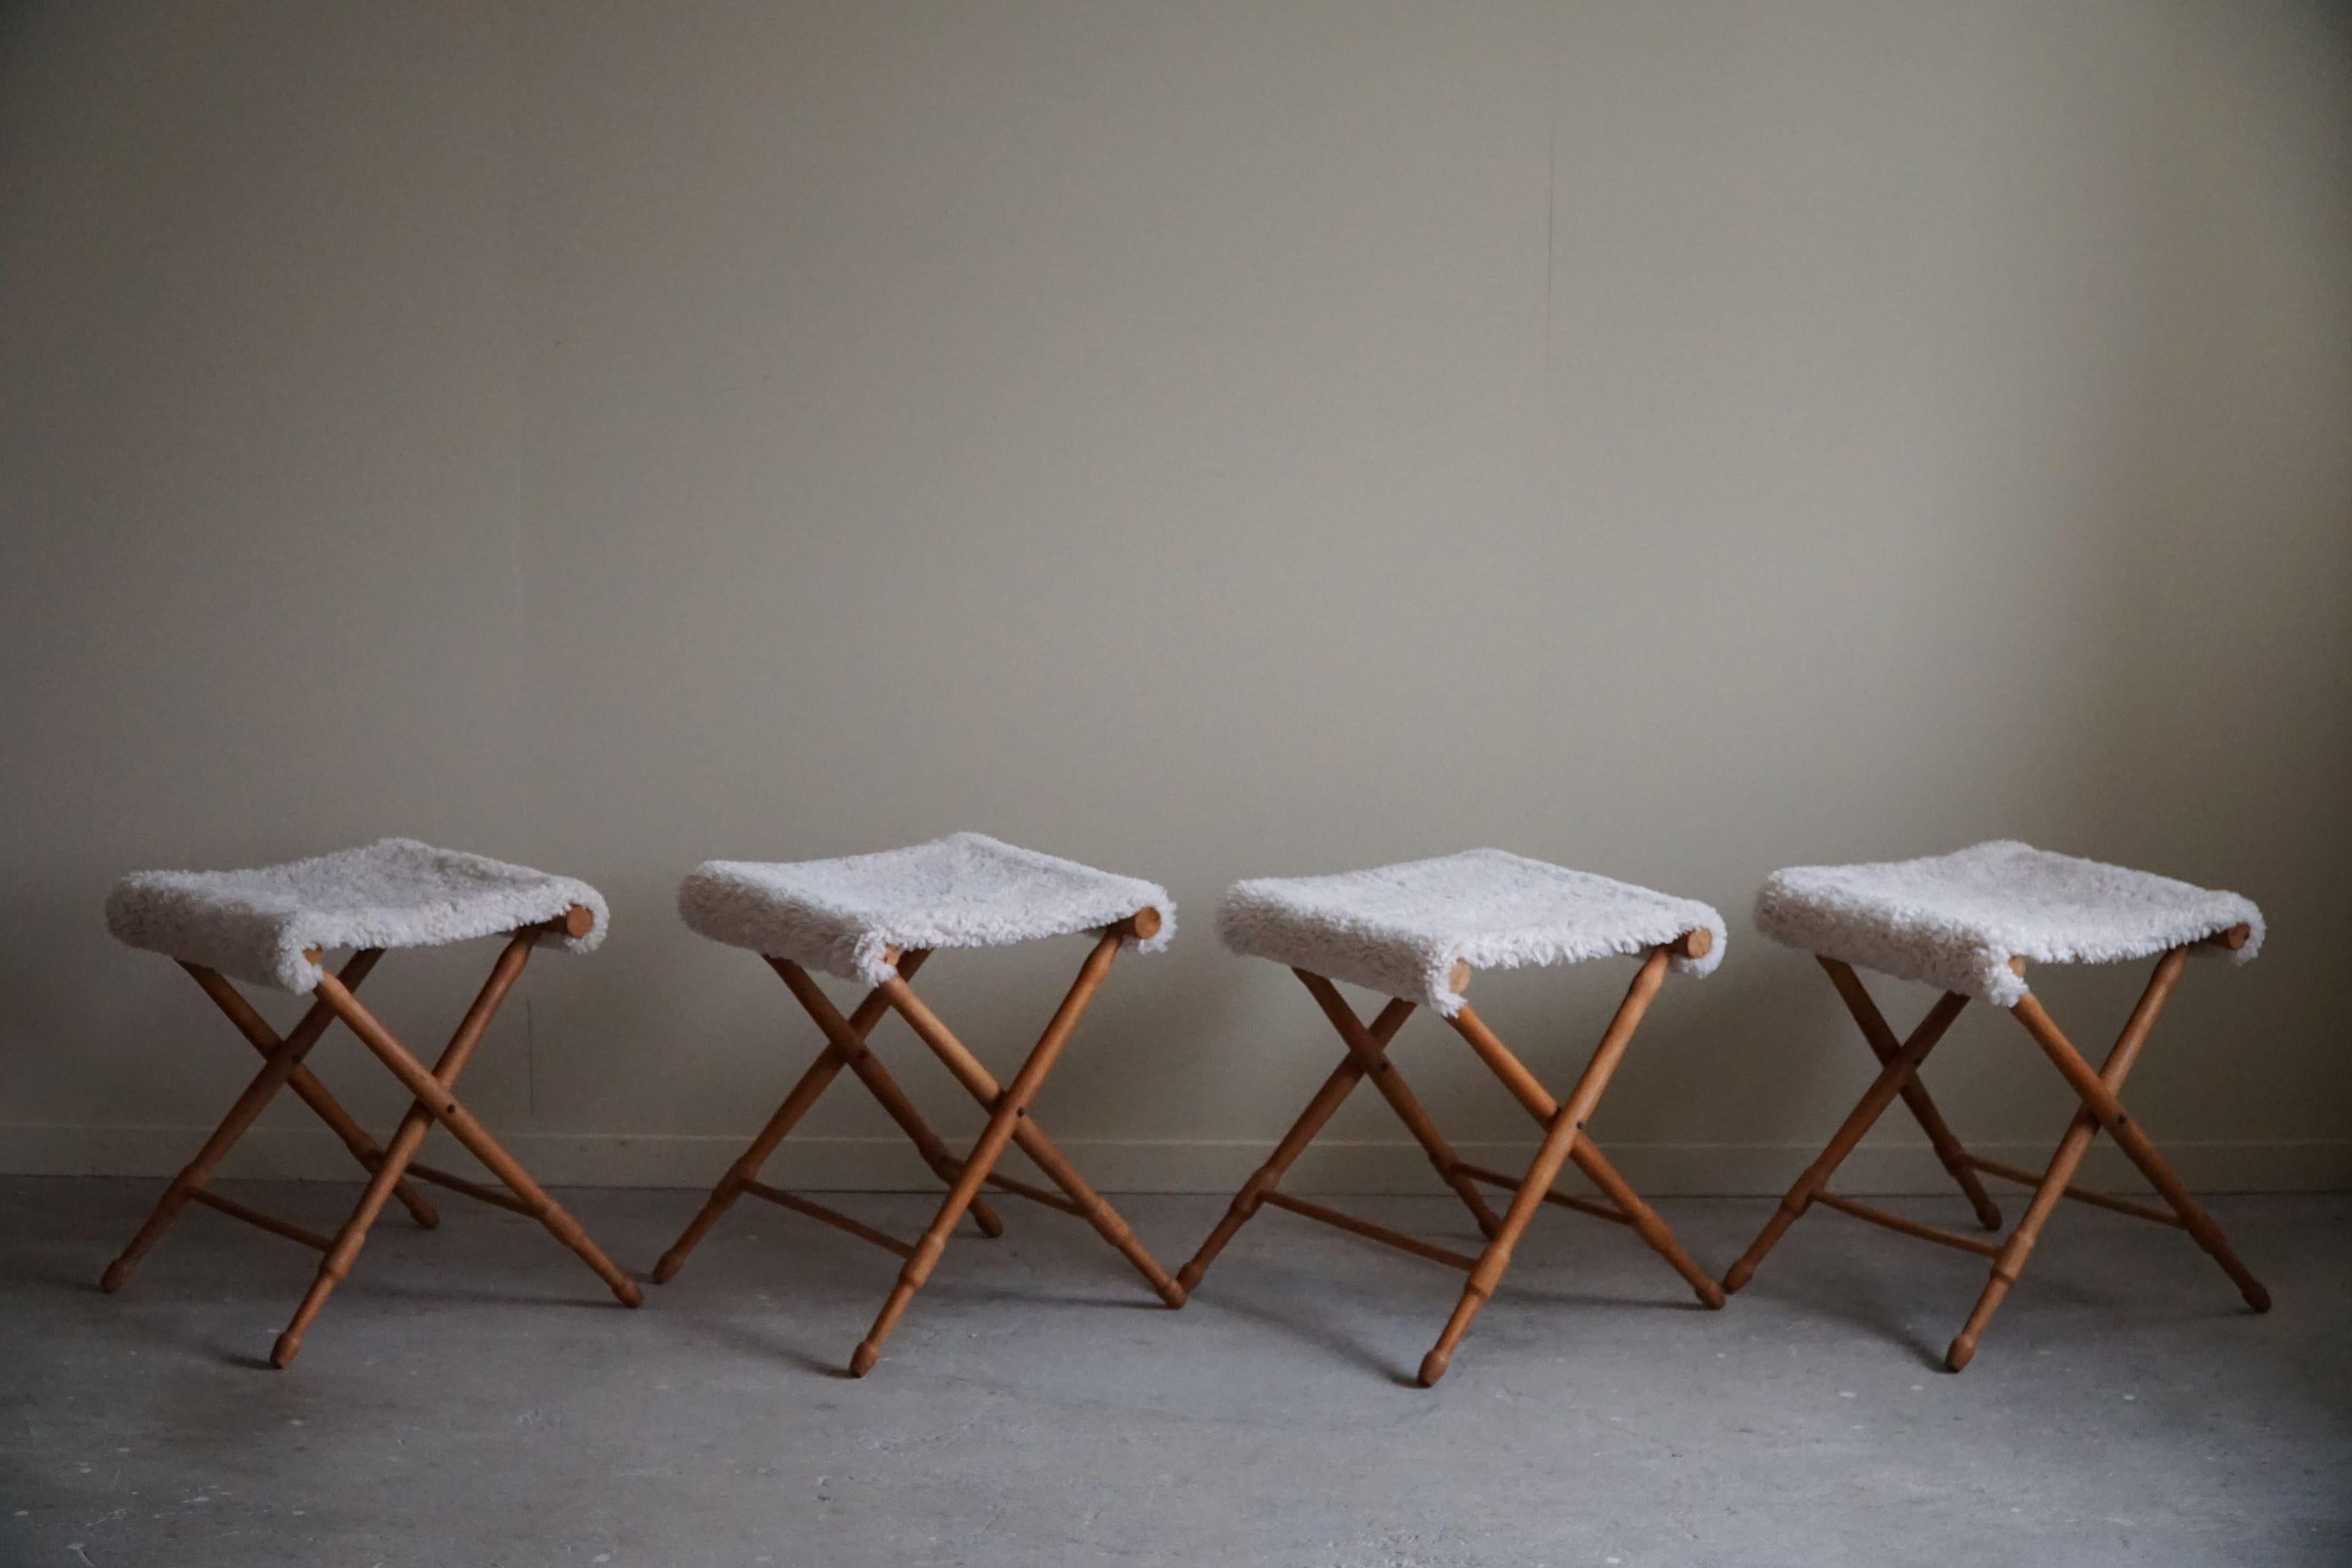 Foldable Stools, Reupholstered in Lambswool, Danish Mid-Century Modern, 1950s 11